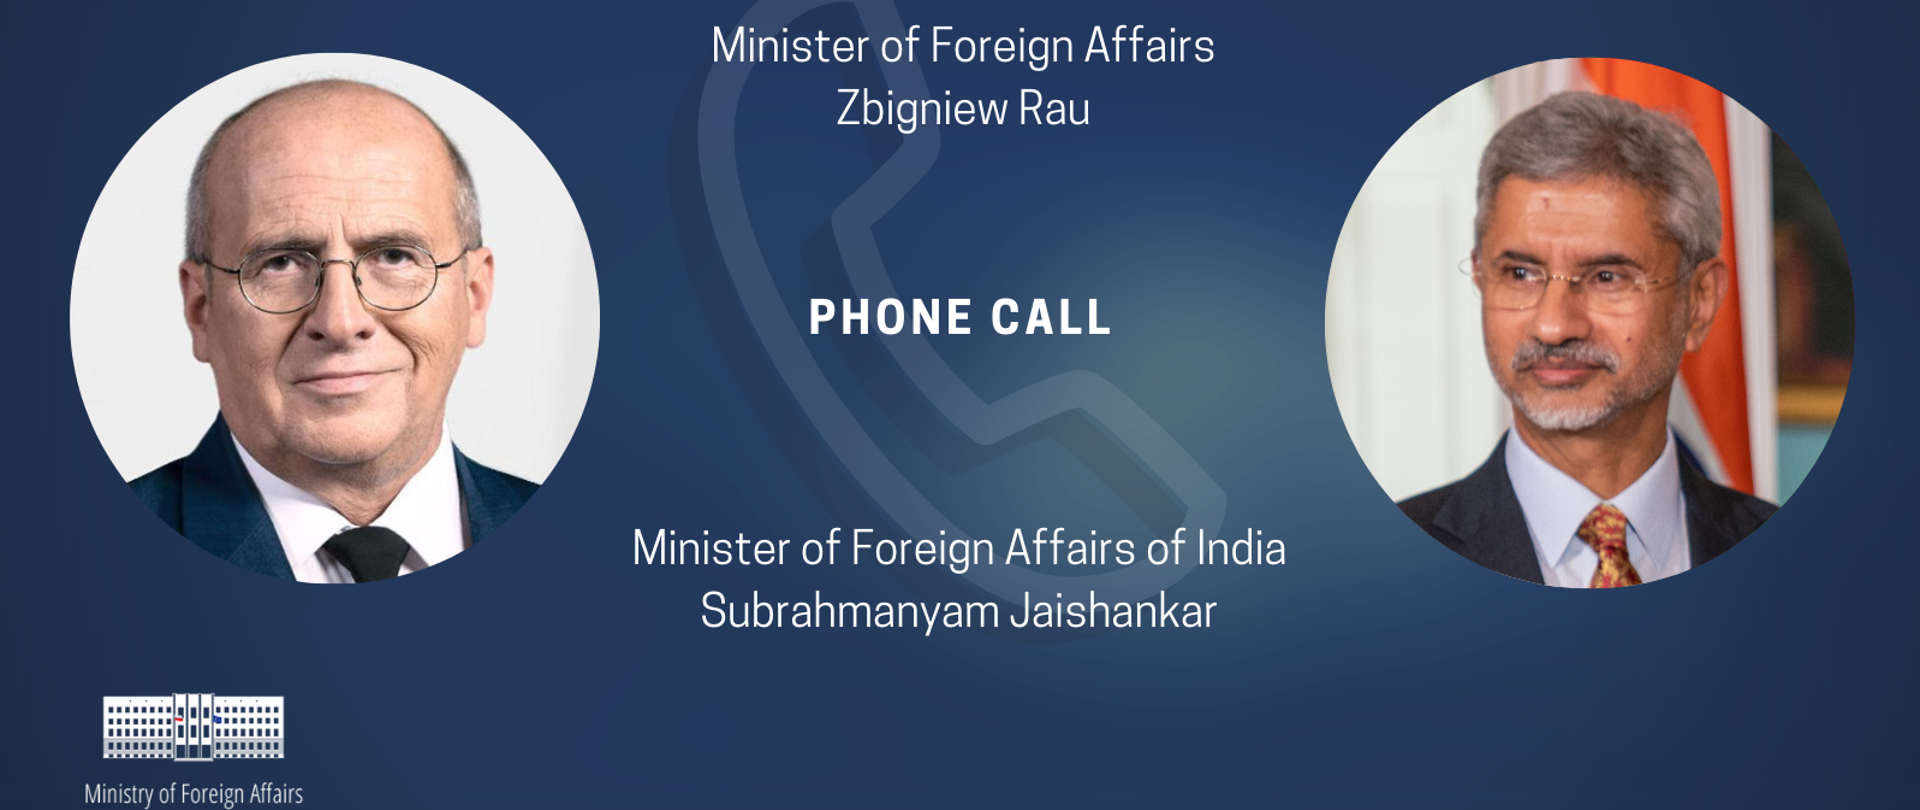 Minister Zbigniew Rau holds a telephone conversation with the Republic of India’s External Affairs Minister Subrahmanyam Jaishankar